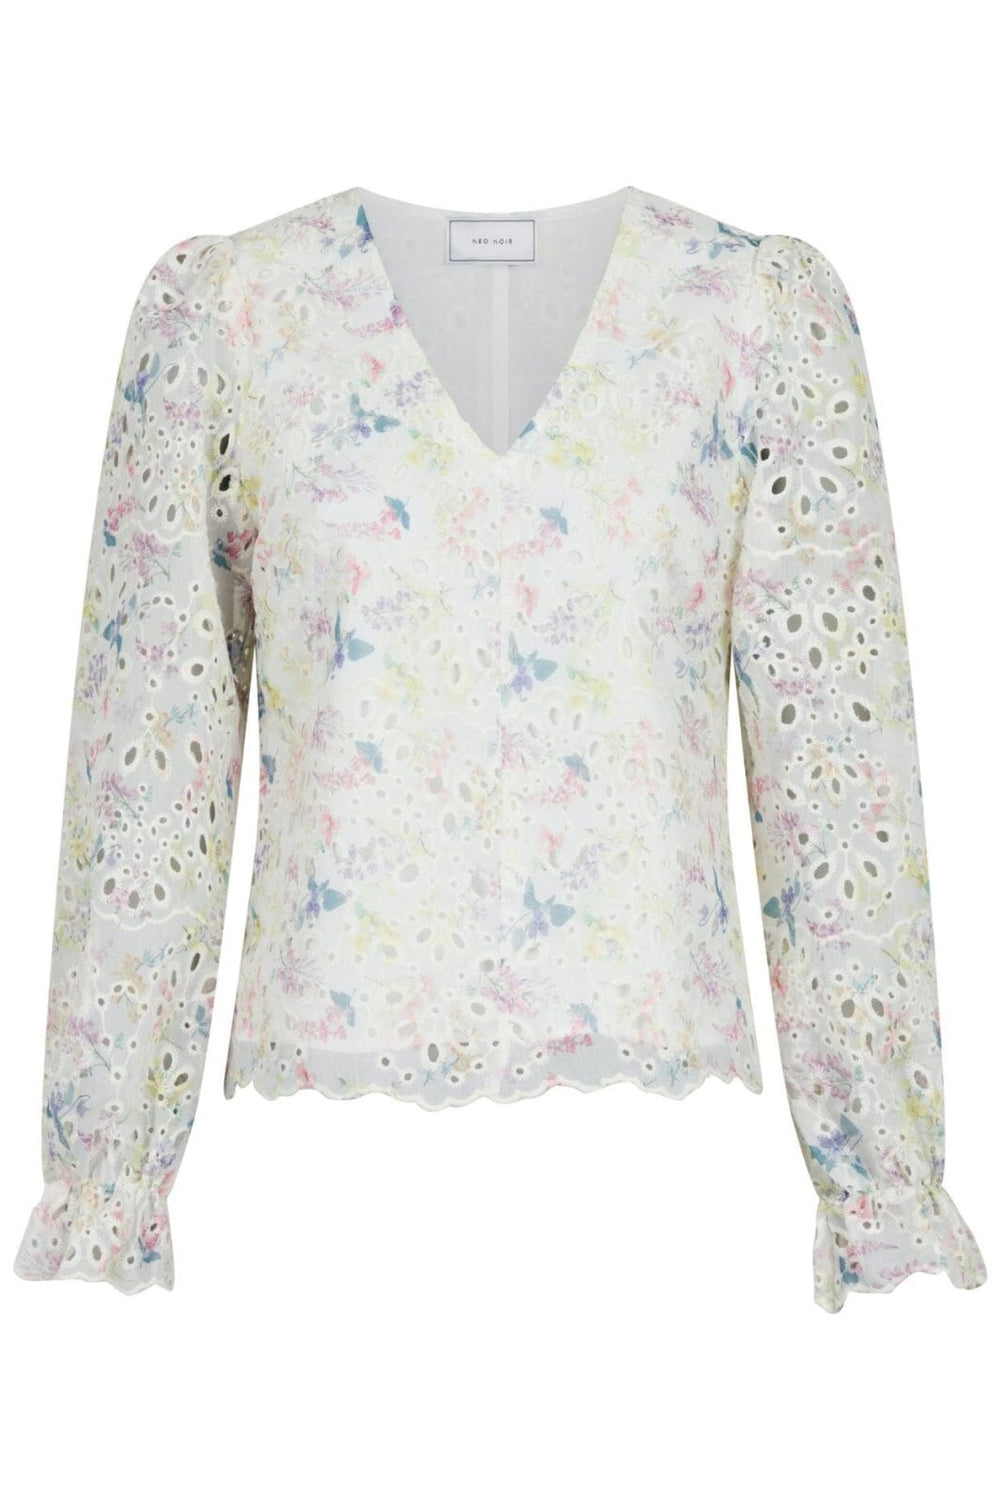 Neo Noir - Candice Embroidery Blouse - Creme Bluser 